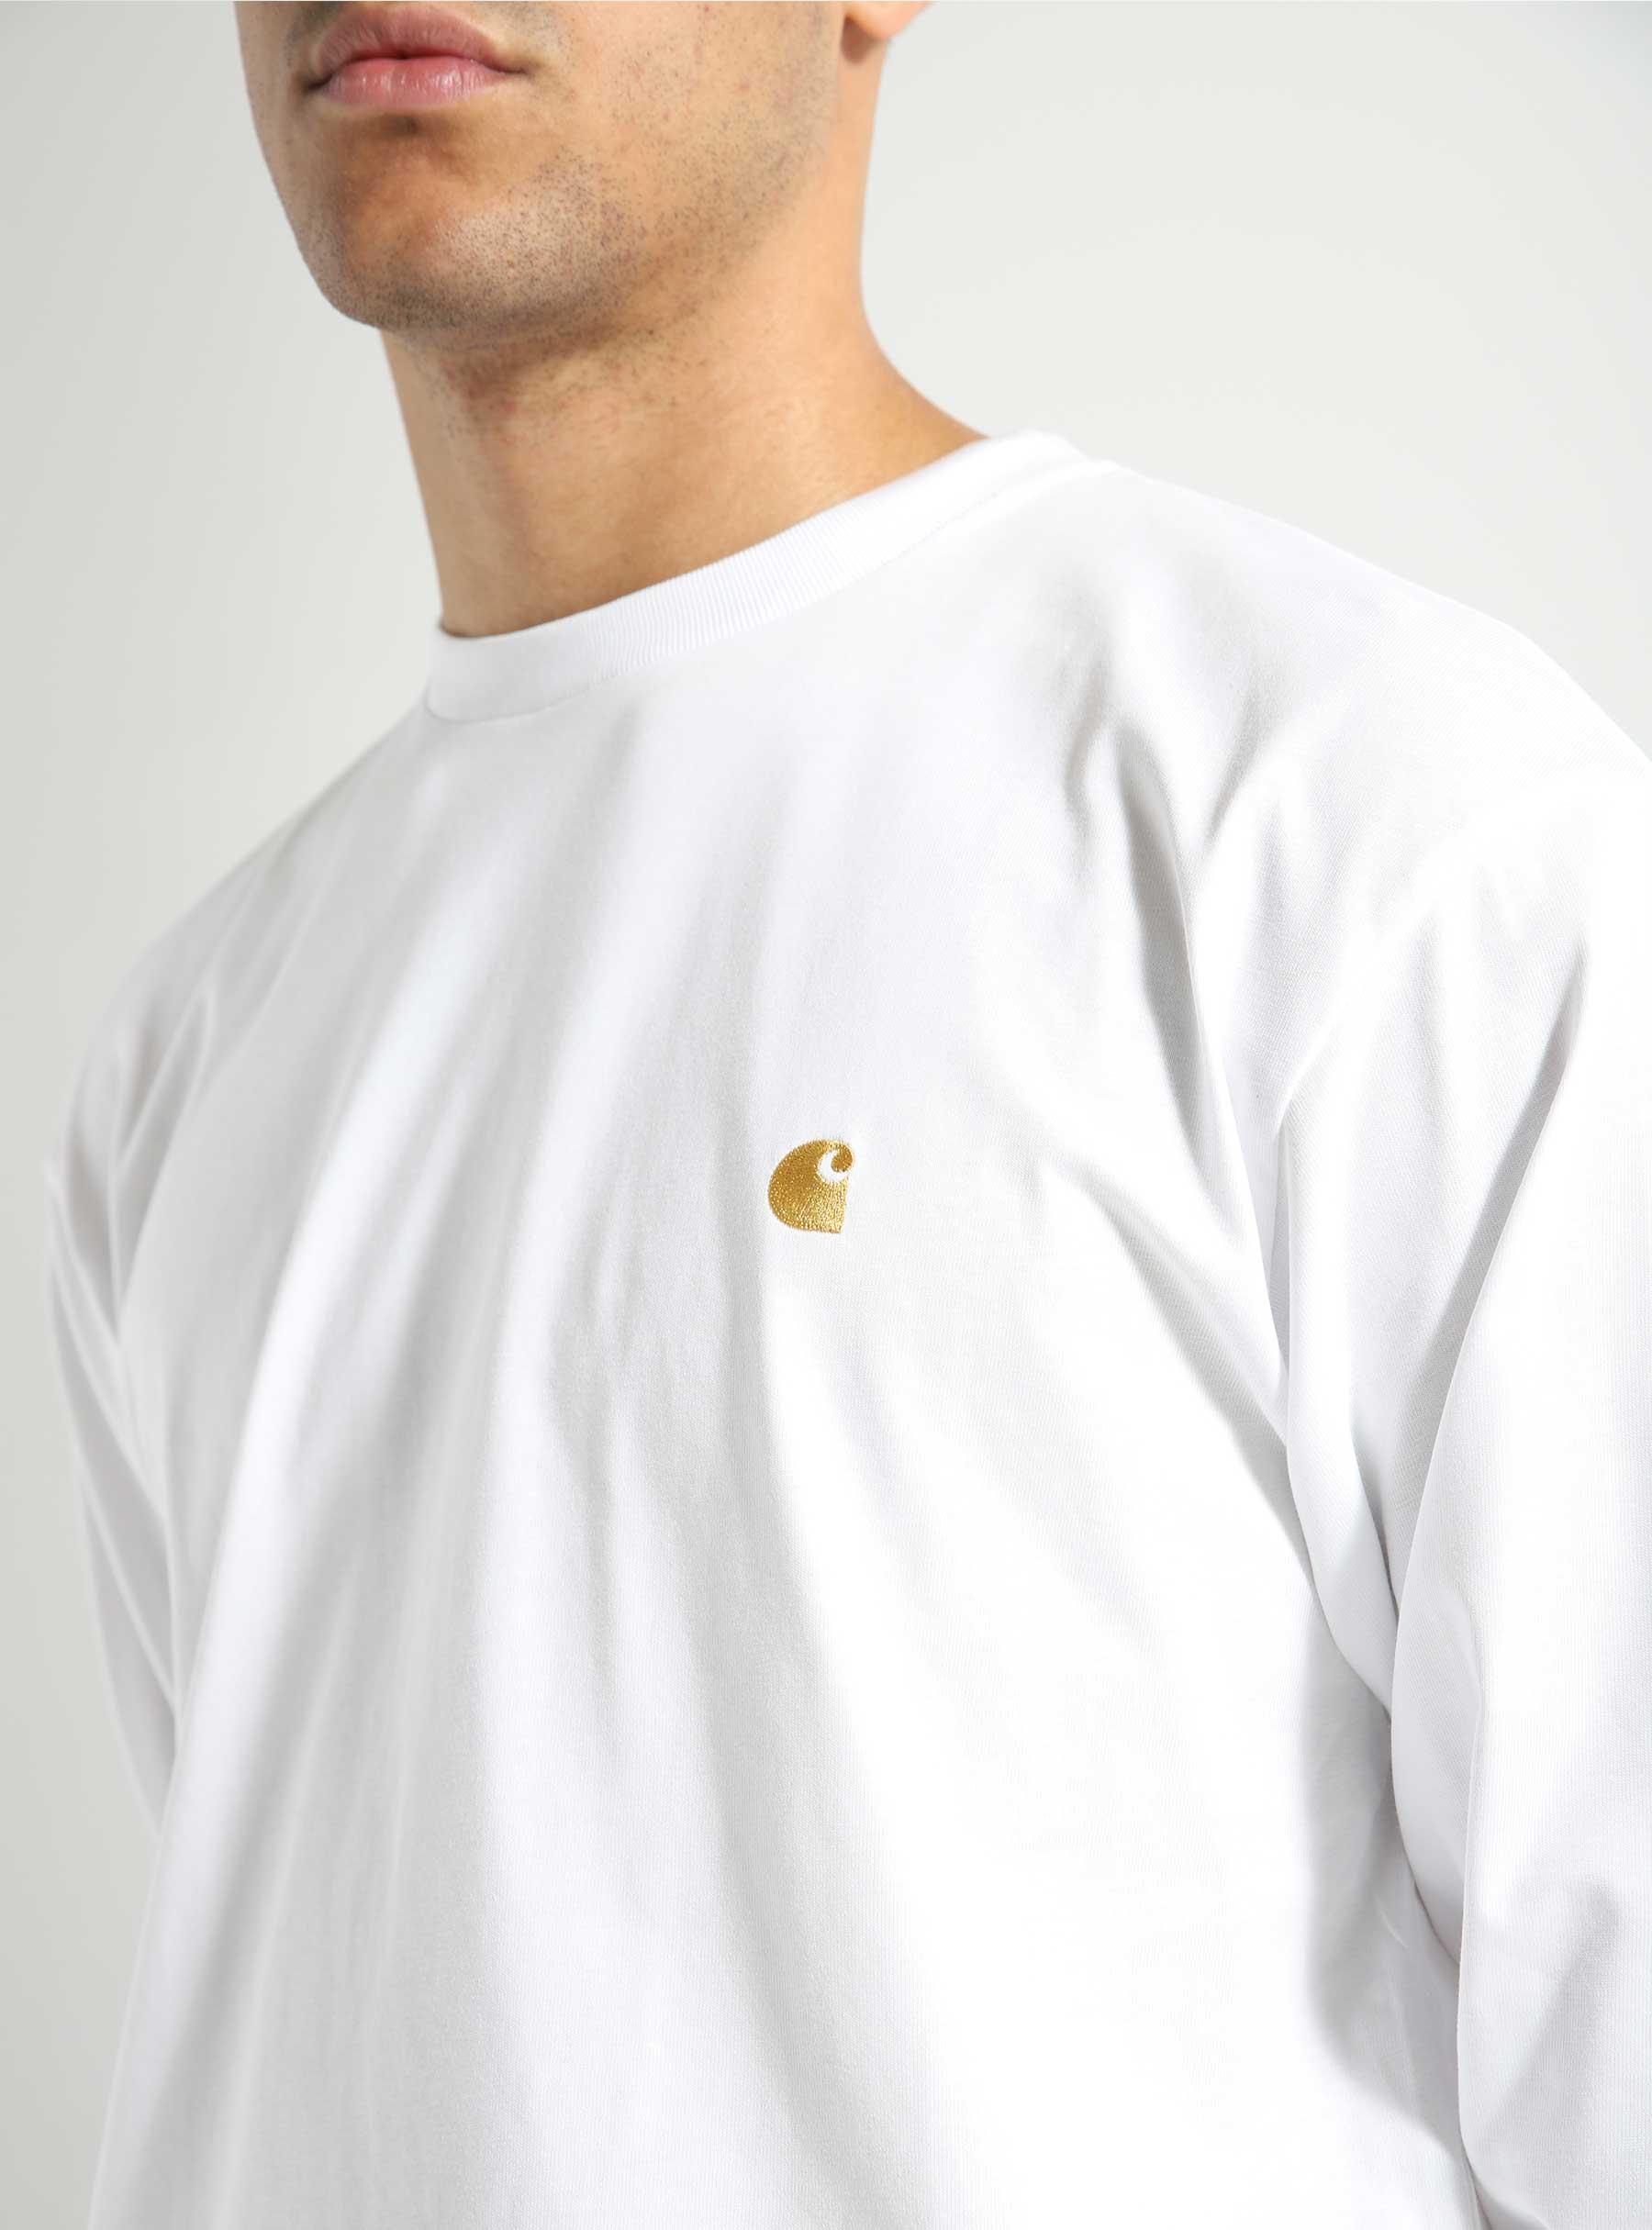 CARHARTT WIP CHASE S/S T-SHIRT WHITE GOLD – BLENDS